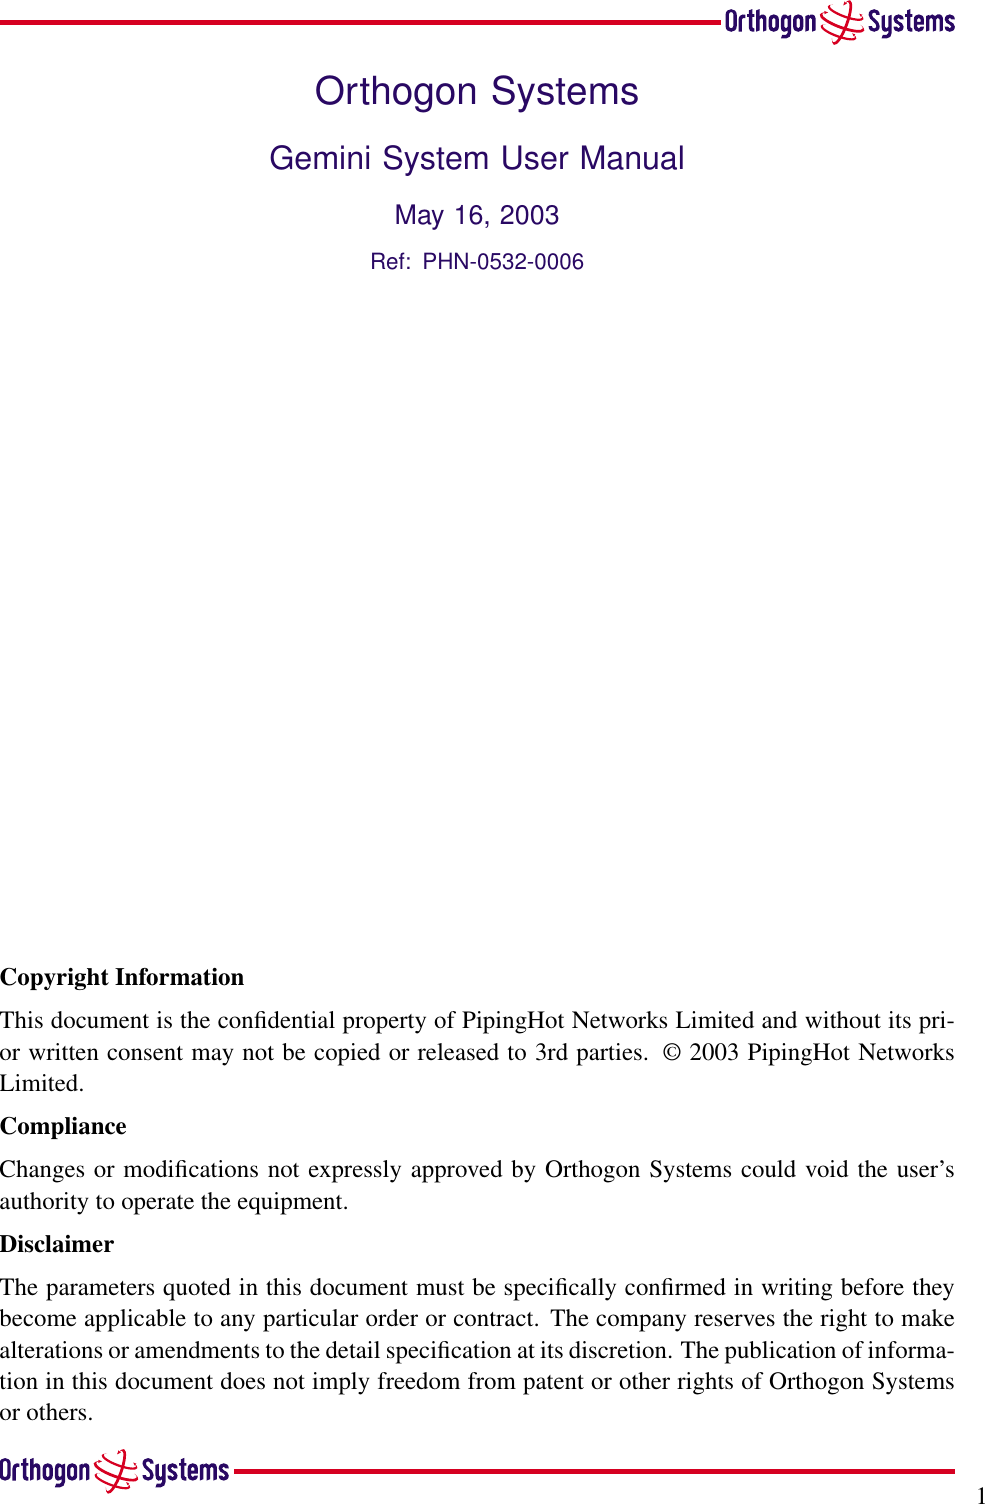 1Orthogon SystemsGemini System User ManualMay 16, 2003Ref: PHN-0532-0006Copyright InformationThis document is the conﬁdential property of PipingHot Networks Limited and without its pri-or written consent may not be copied or released to 3rd parties. © 2003 PipingHot NetworksLimited.ComplianceChanges or modiﬁcations not expressly approved by Orthogon Systems could void the user’sauthority to operate the equipment.DisclaimerThe parameters quoted in this document must be speciﬁcally conﬁrmed in writing before theybecome applicable to any particular order or contract. The company reserves the right to makealterations or amendments to the detail speciﬁcation at its discretion. The publication of informa-tion in this document does not imply freedom from patent or other rights of Orthogon Systemsor others.